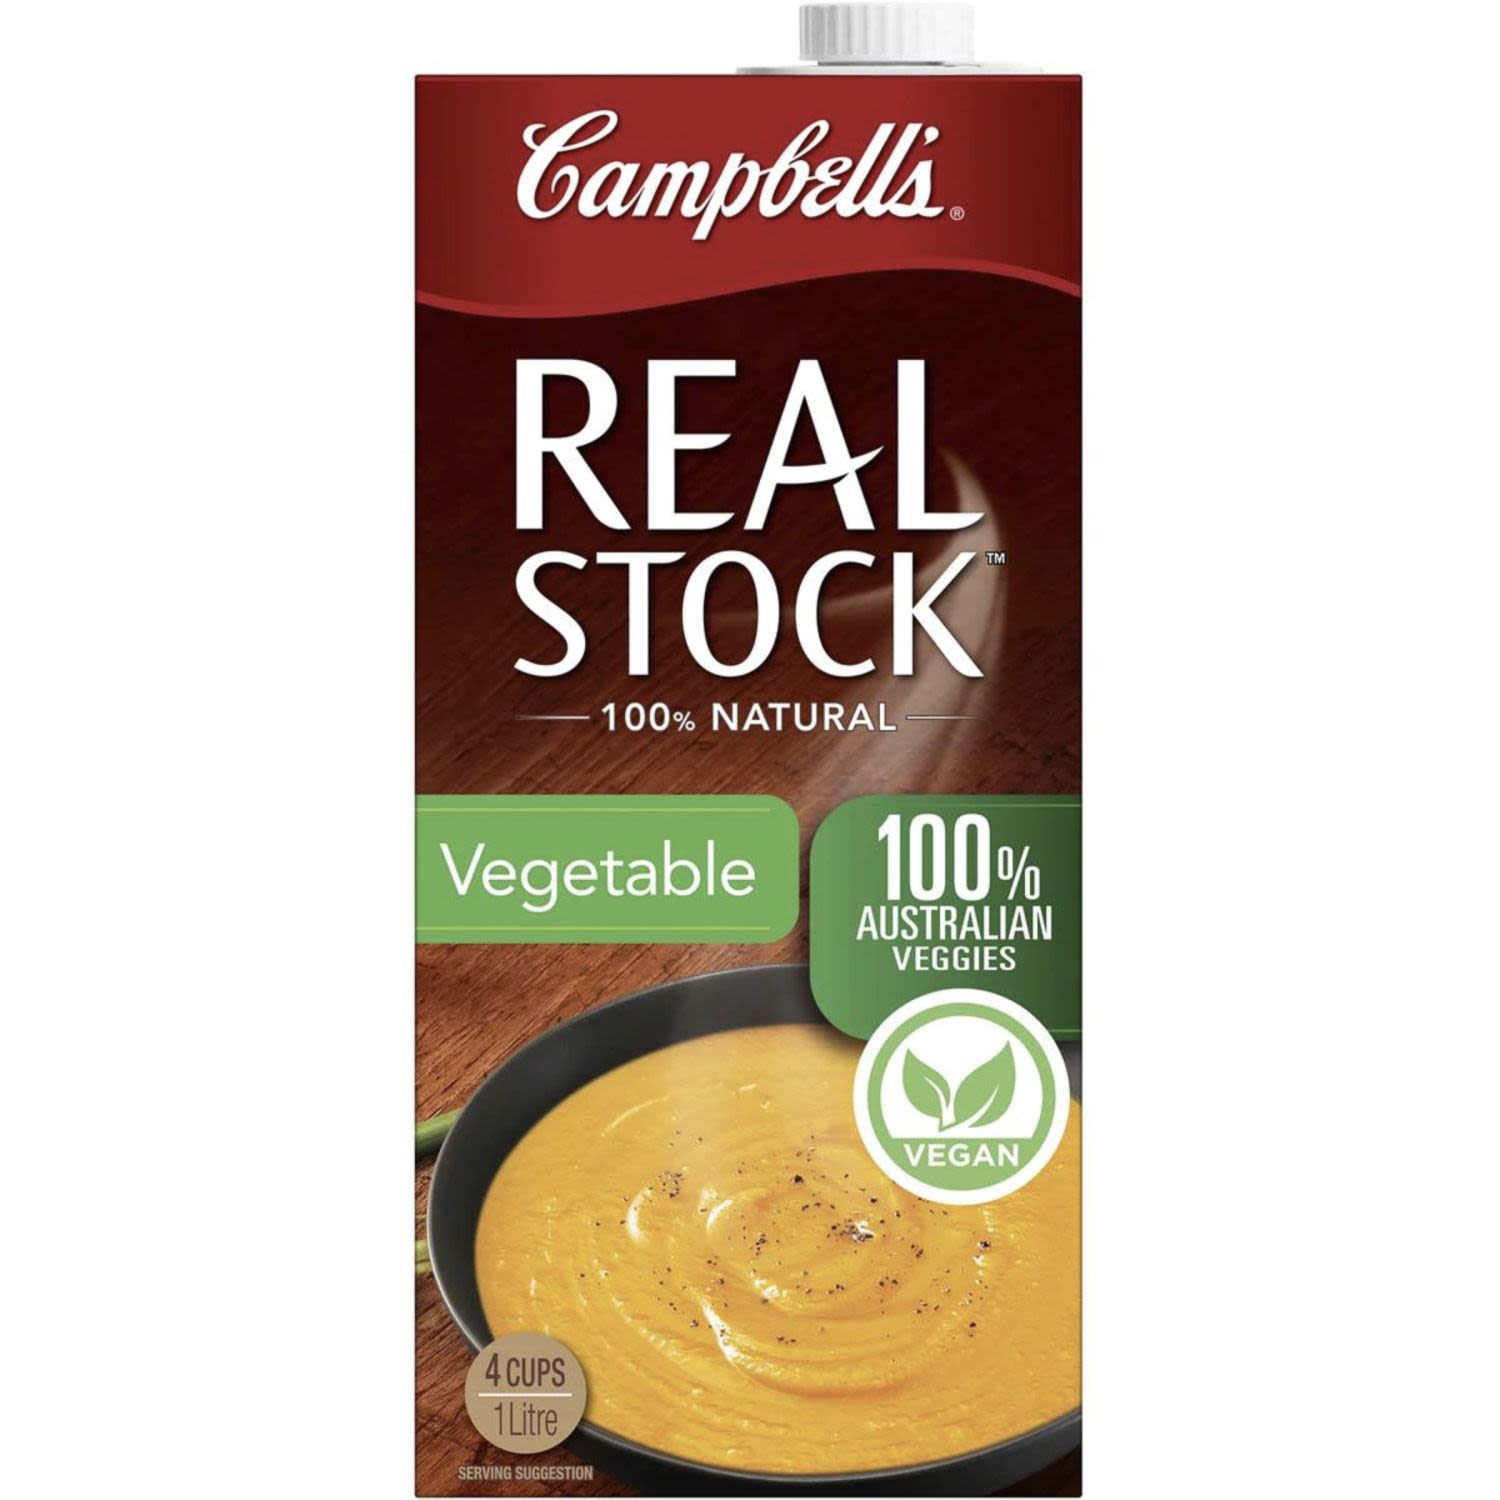 Campbell's Real Stock Vegetable, 1 Litre